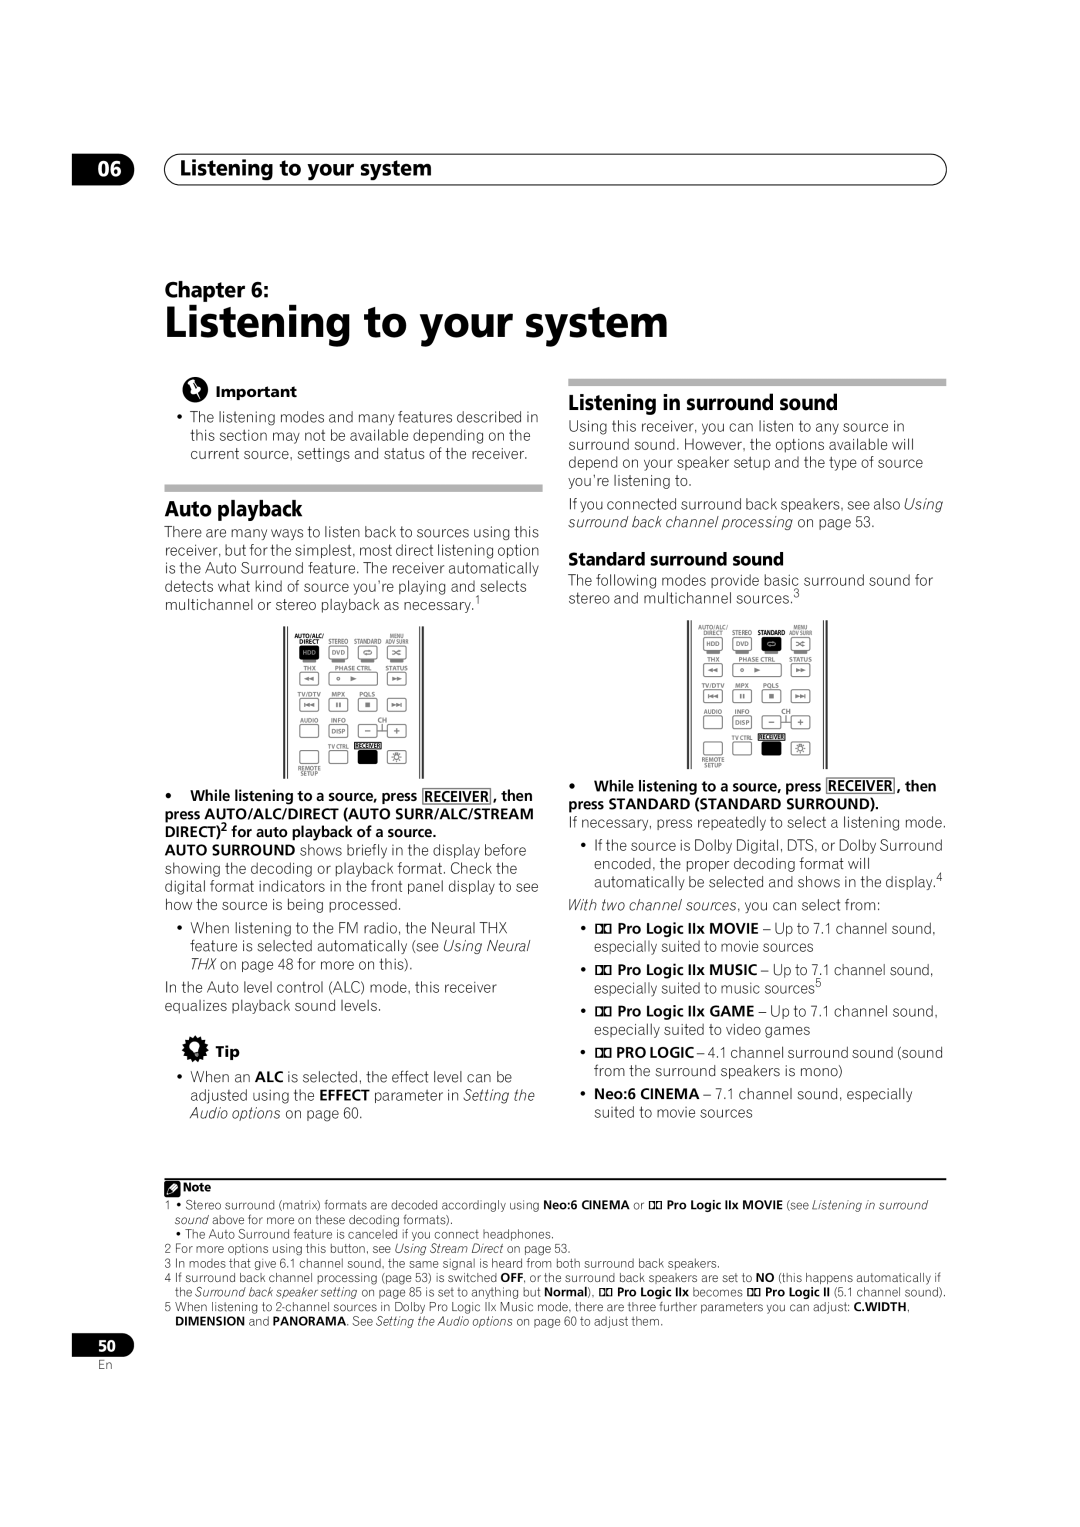 Pioneer VSX-LX52 manual 06Listening to your system Chapter, Listening in surround sound, Auto playback 